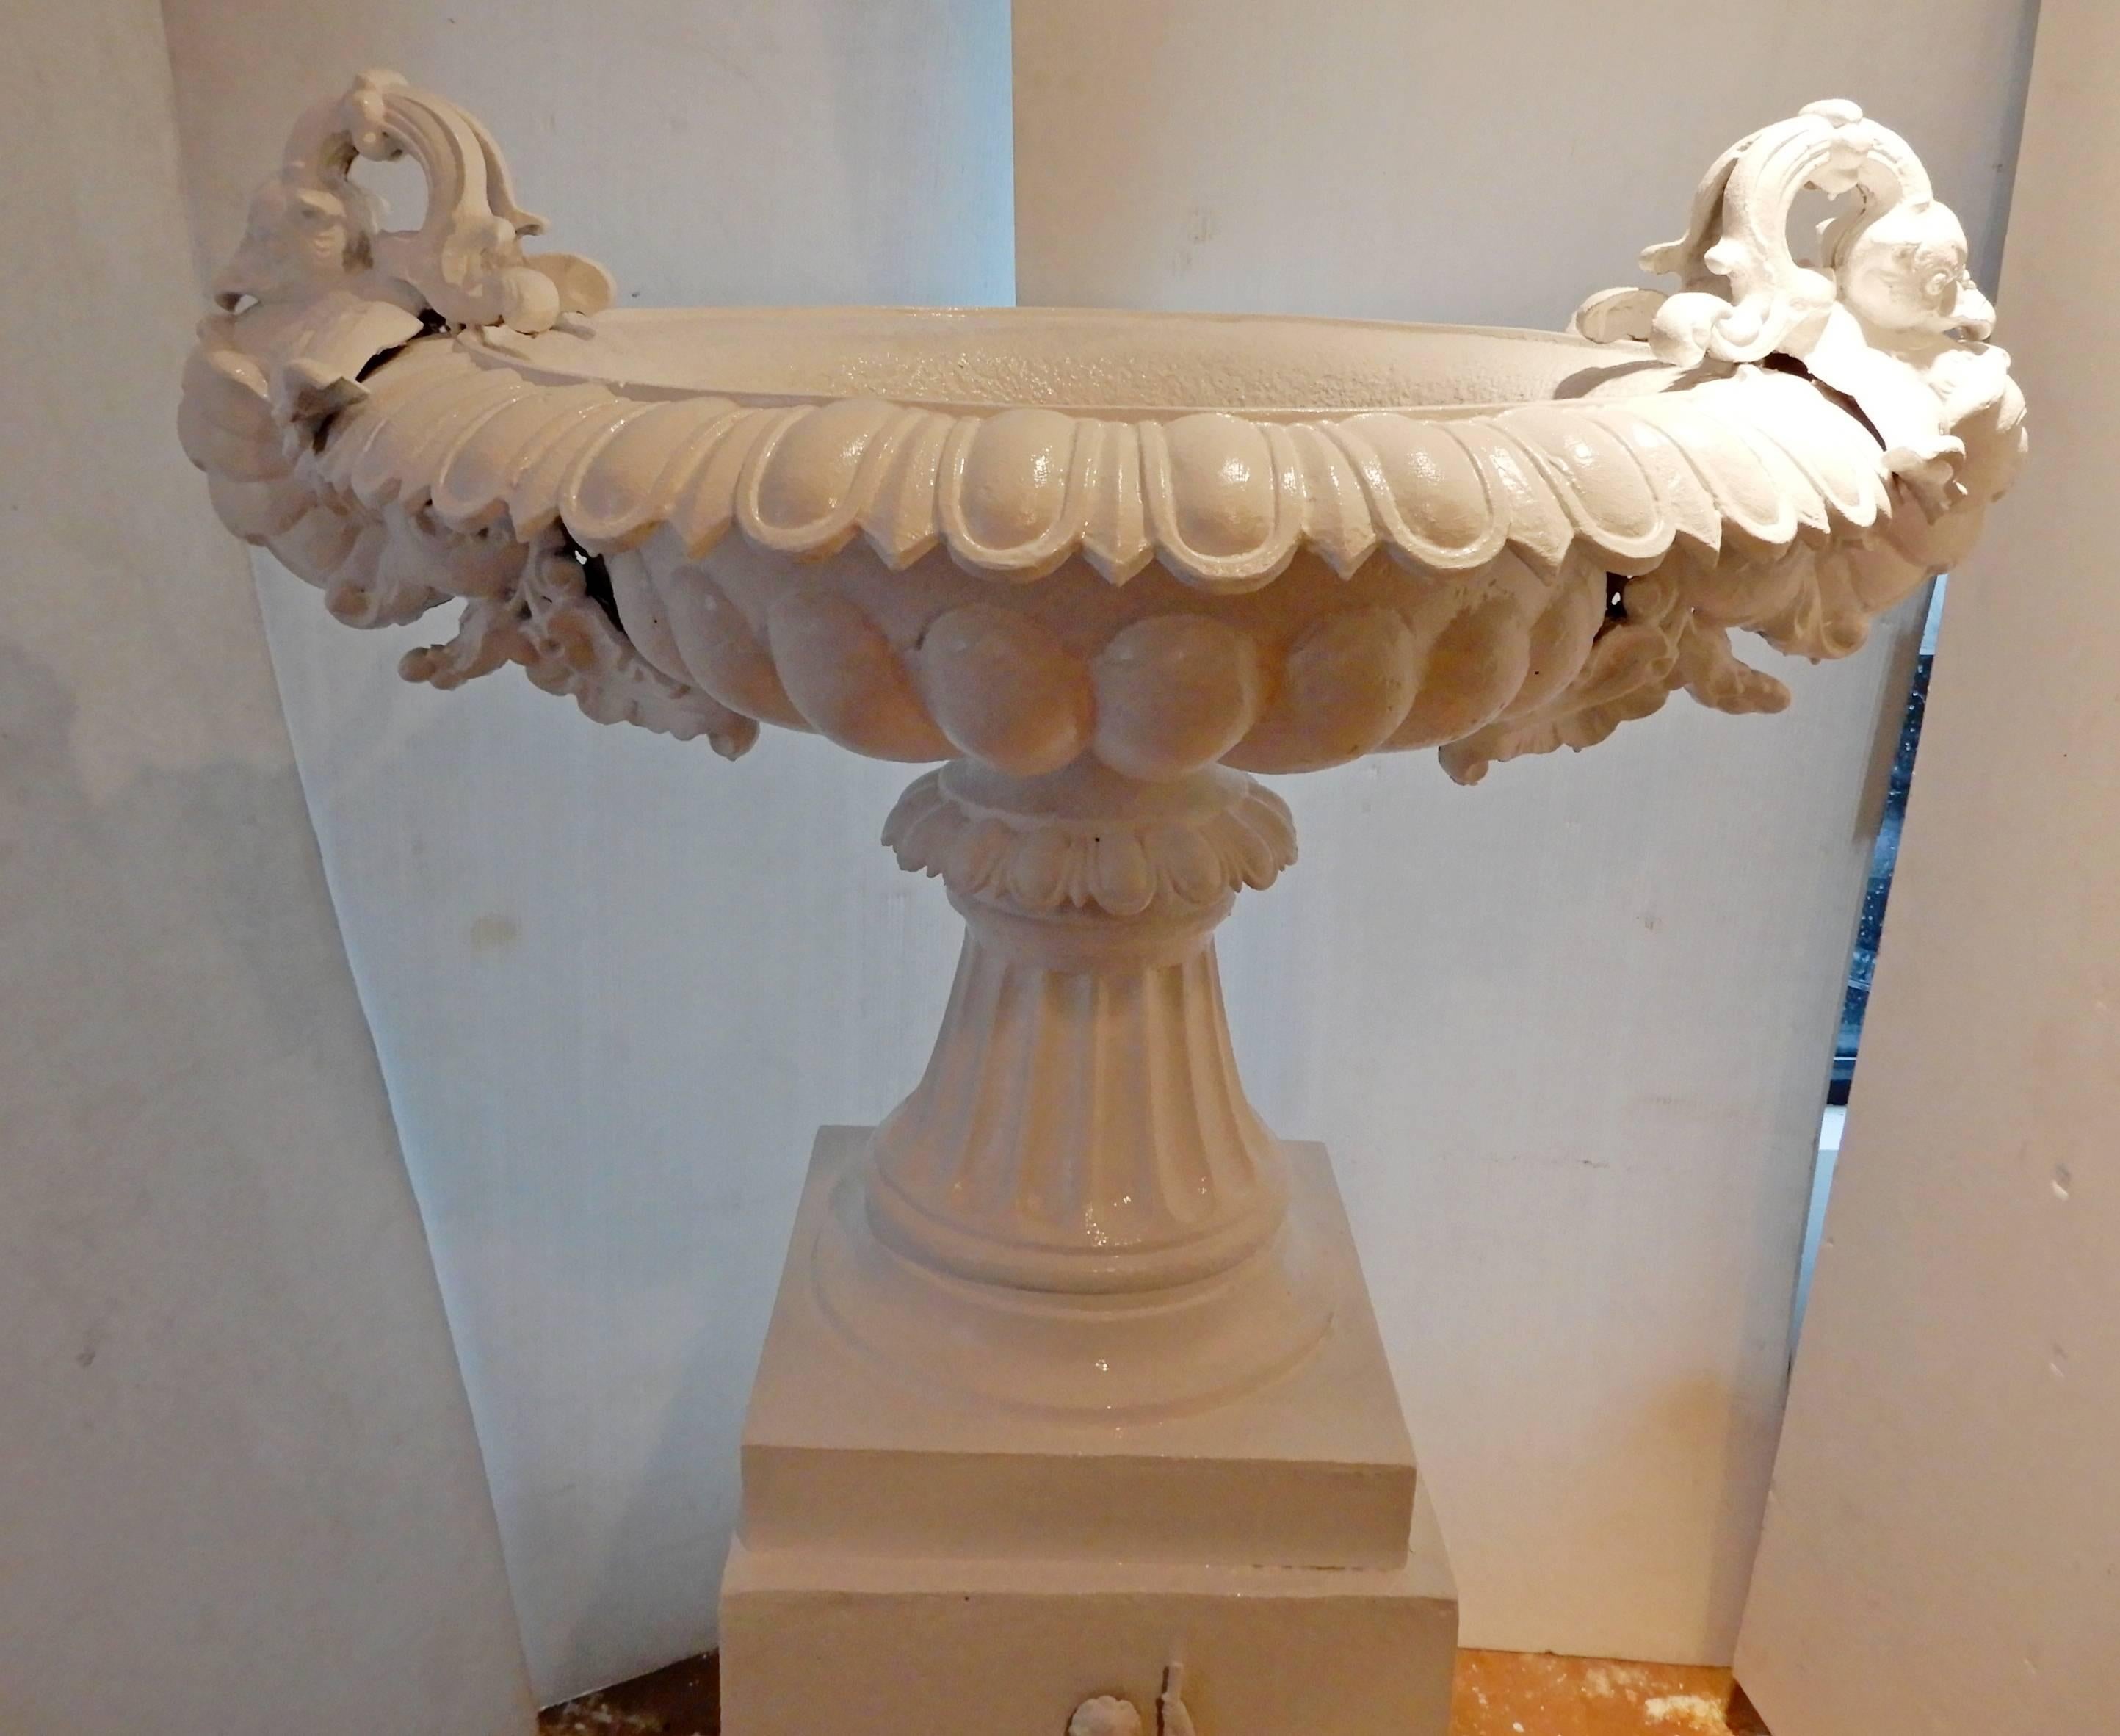 This is an ornate 19th century cast iron garden urn. This distinctive 5 foot tall Victorian garden urn is similar to signed Fiske urns previously in inventory. The urn is in mint condition and extremely heavy to move. There are four different